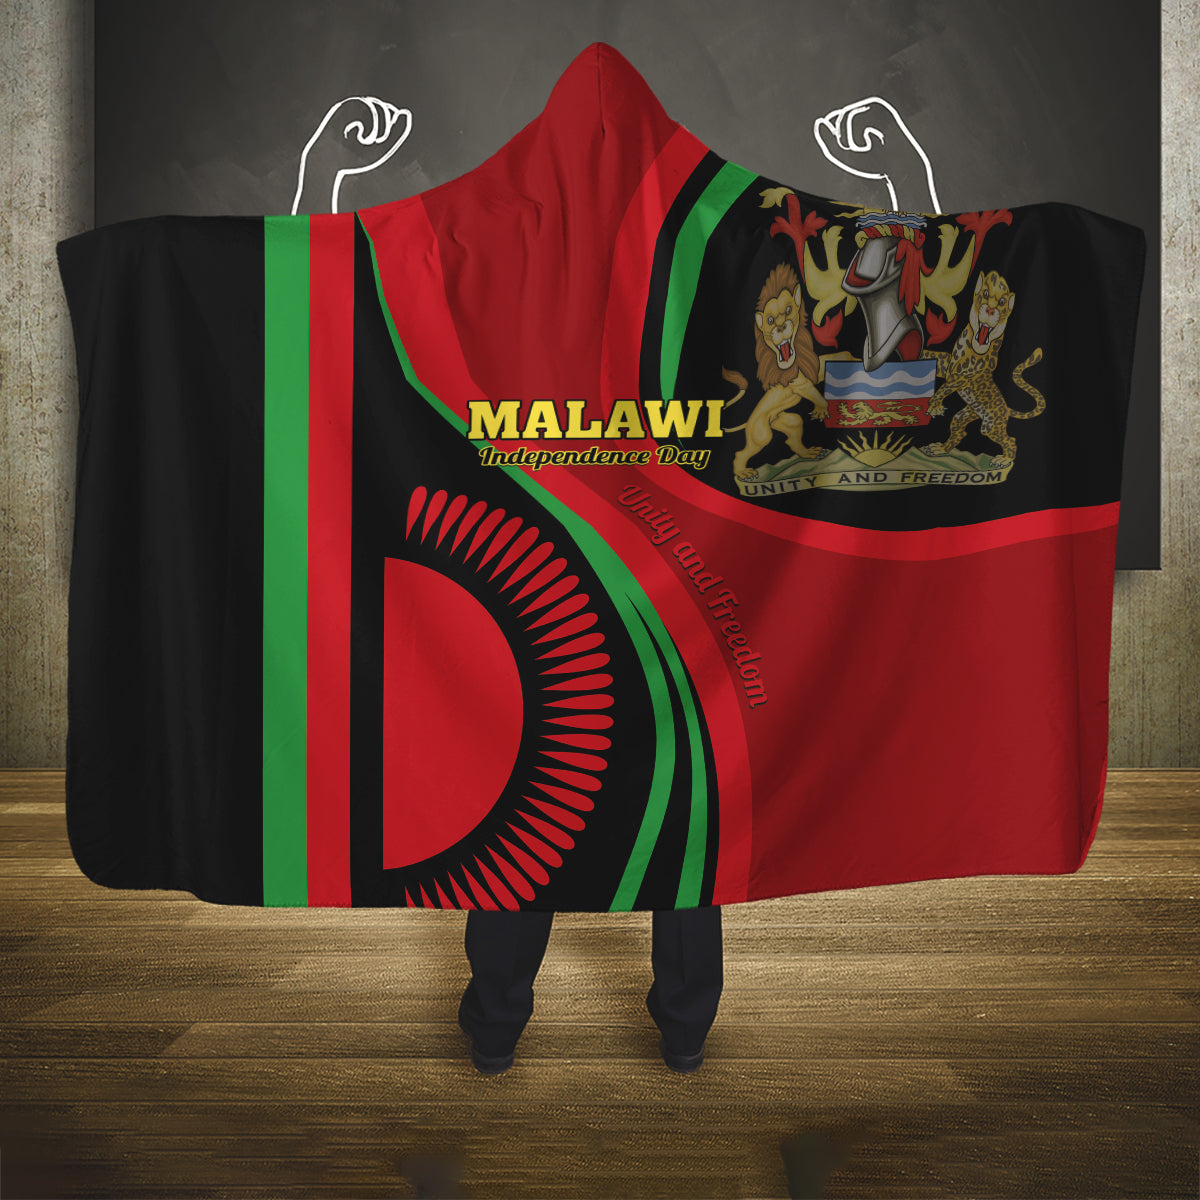 Malawi Independence Day Hooded Blanket Unity and Freedom